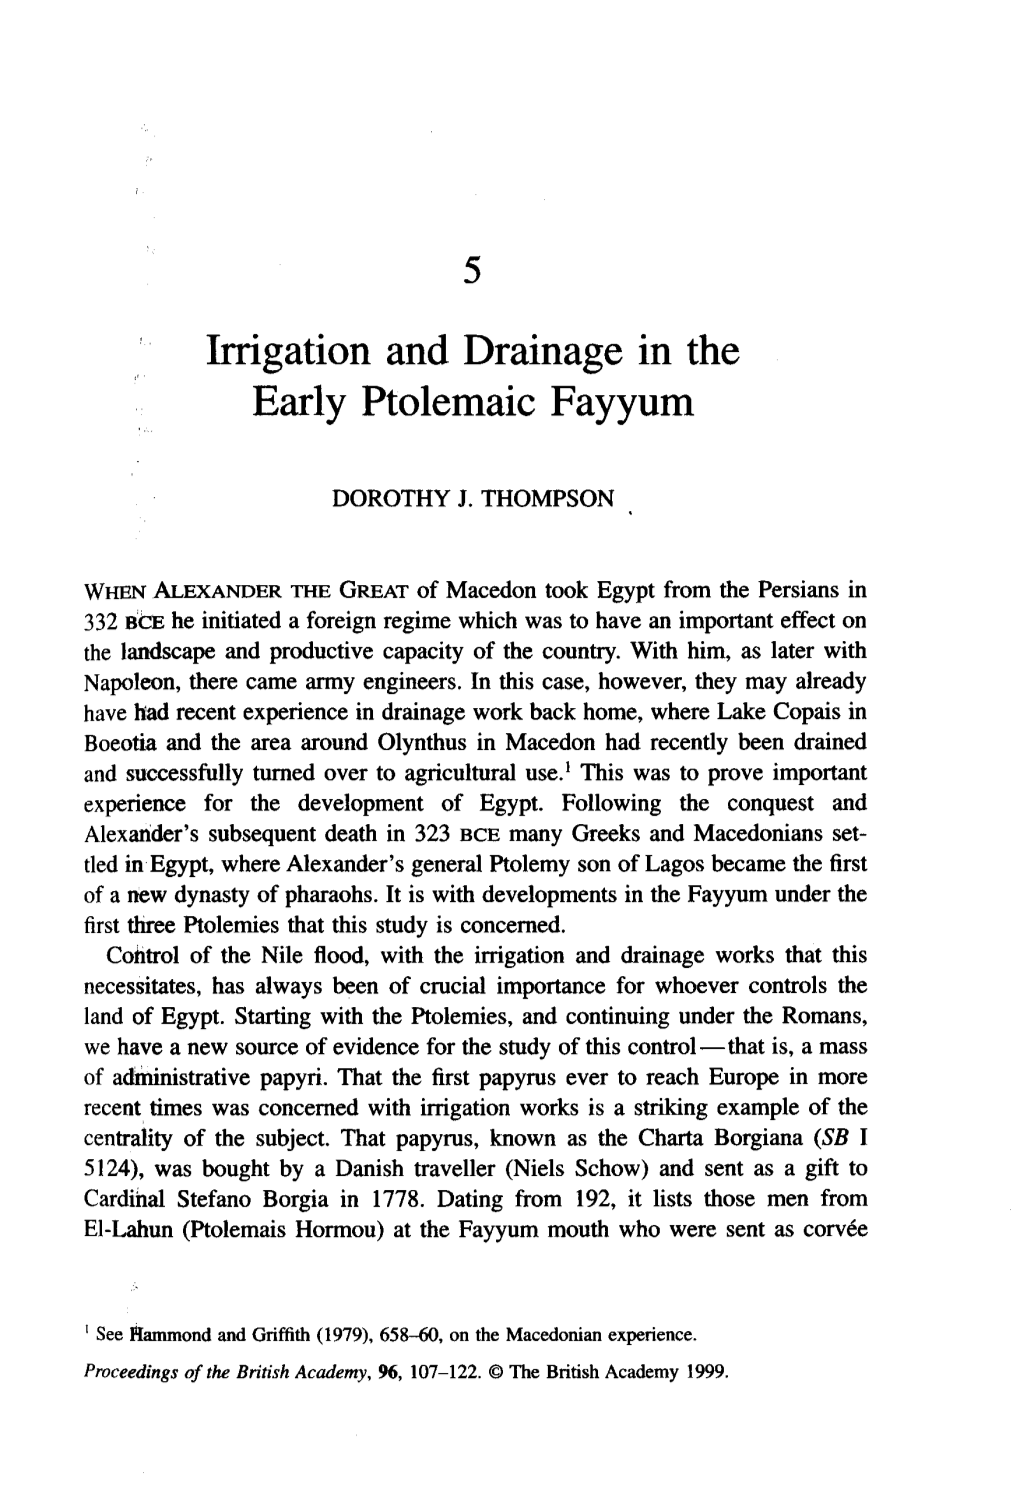 Irrigation and Drainage in the Early Ptolemaic Fayyum